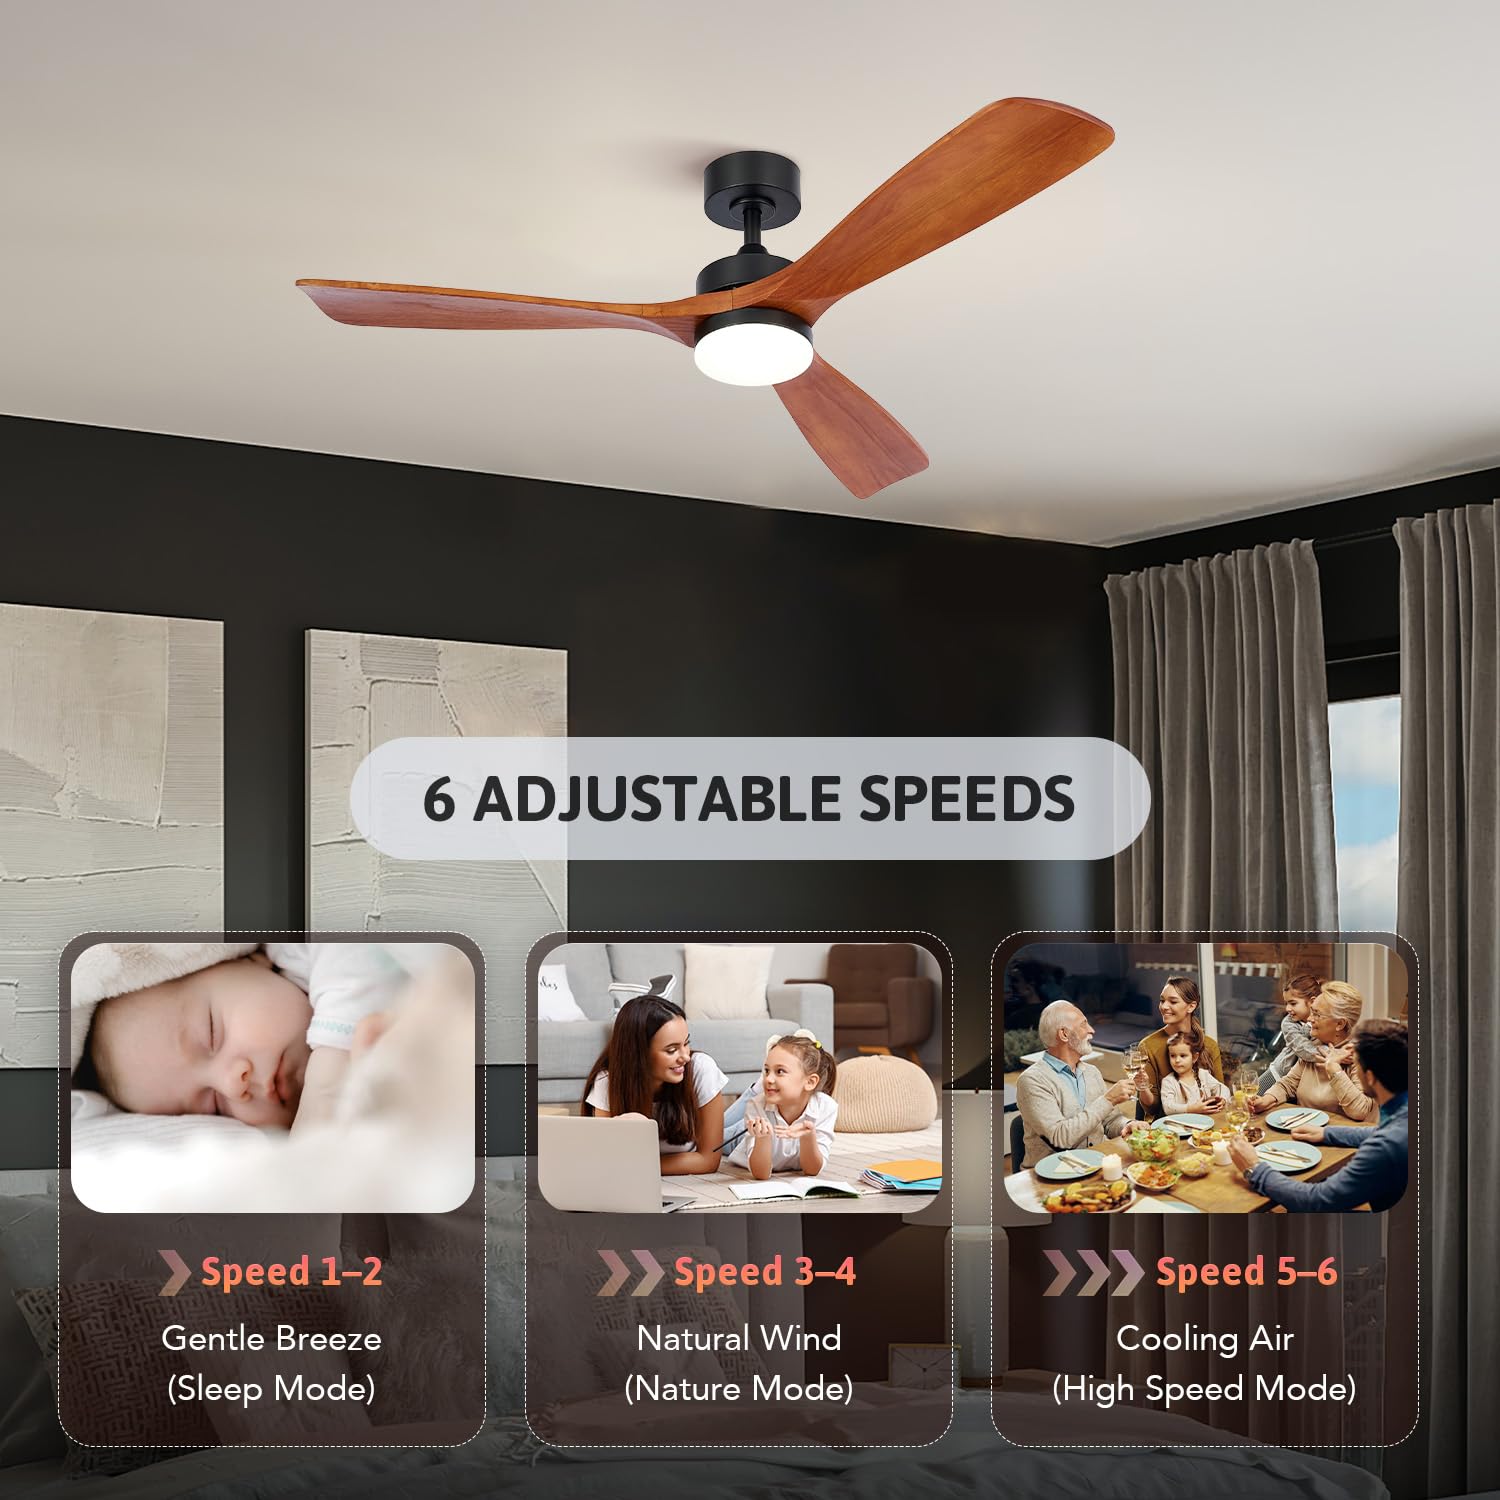 VONLUCE Wood Ceiling Fans with Lights, 52 Inch Outdoor Ceiling Fan with Remote, 6 Speed Reversible Noiseless DC Motor, Modern Ceiling Fan for Indoor Bedroom Farmhouse Patios, Walnut